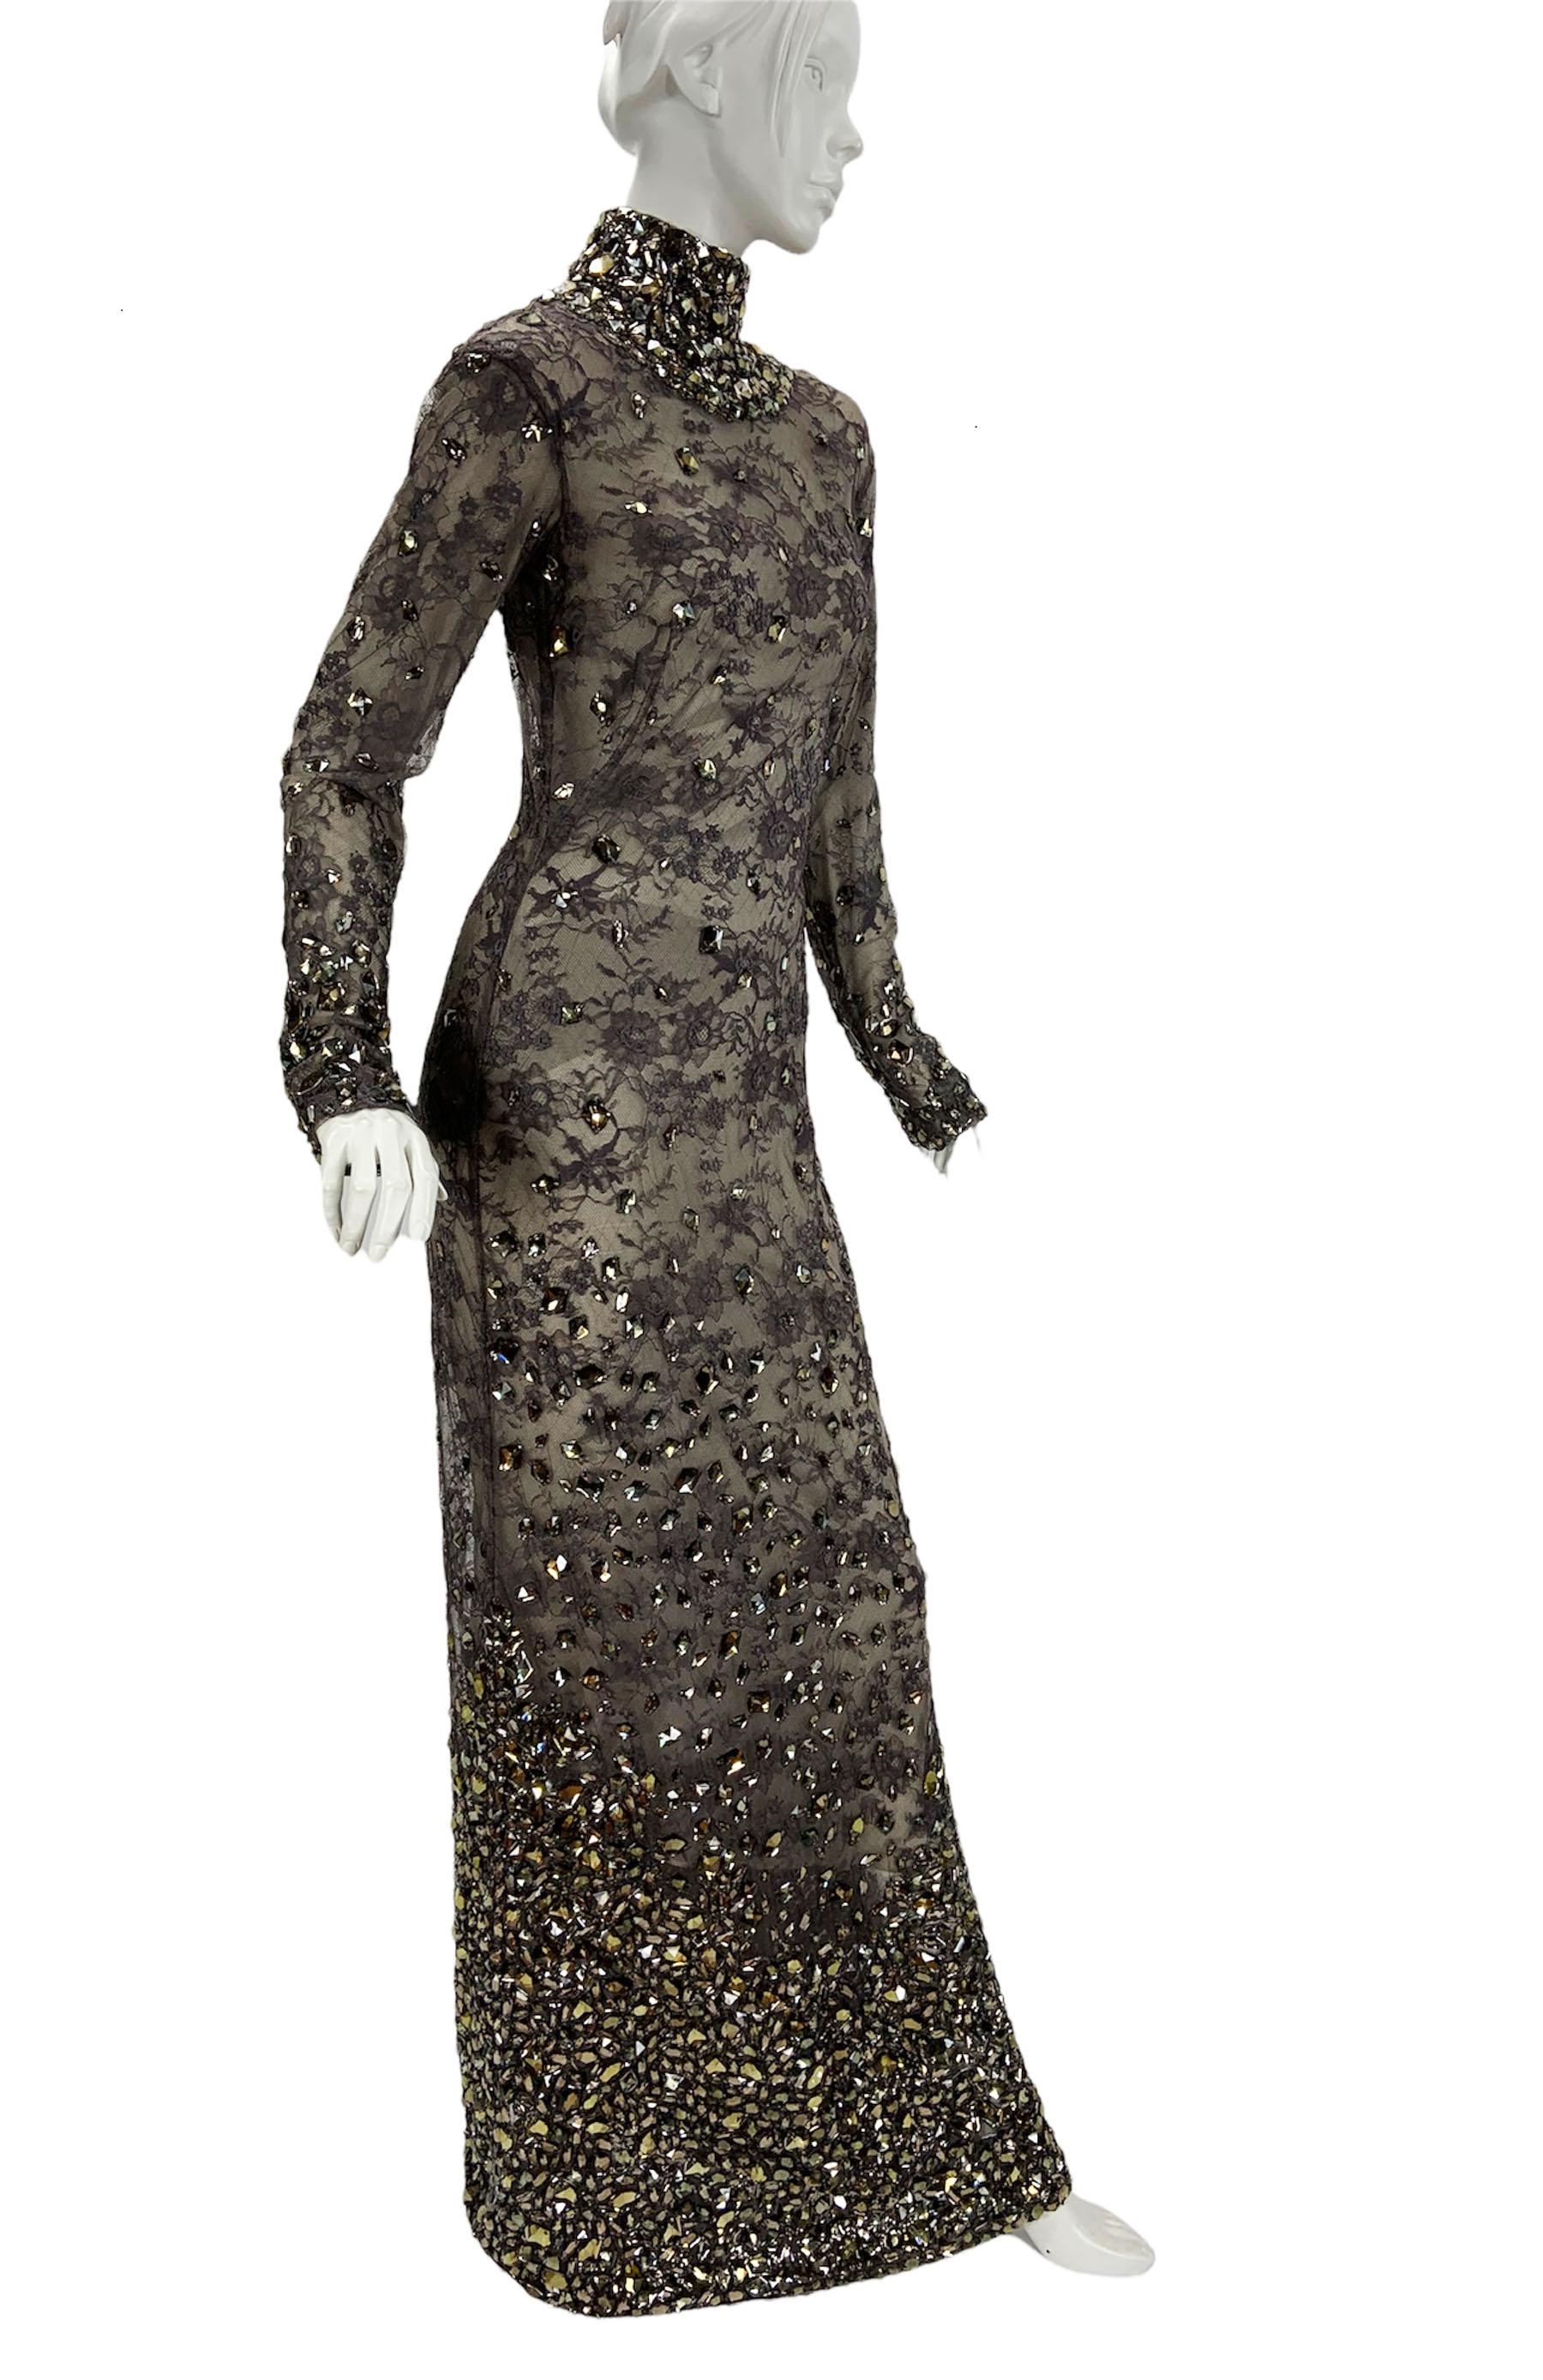 New Tom Ford *Broken Mirror* Lace Faceted Crystal Embellished Dress Gown
Tom Ford's First Womenswear Collection for his Eponimous Label Debuted in 2011.
Italian size 42
Smokey Gray Floral Lace Finished with Soft Yellow Crystals, Fully Lined in Silk,